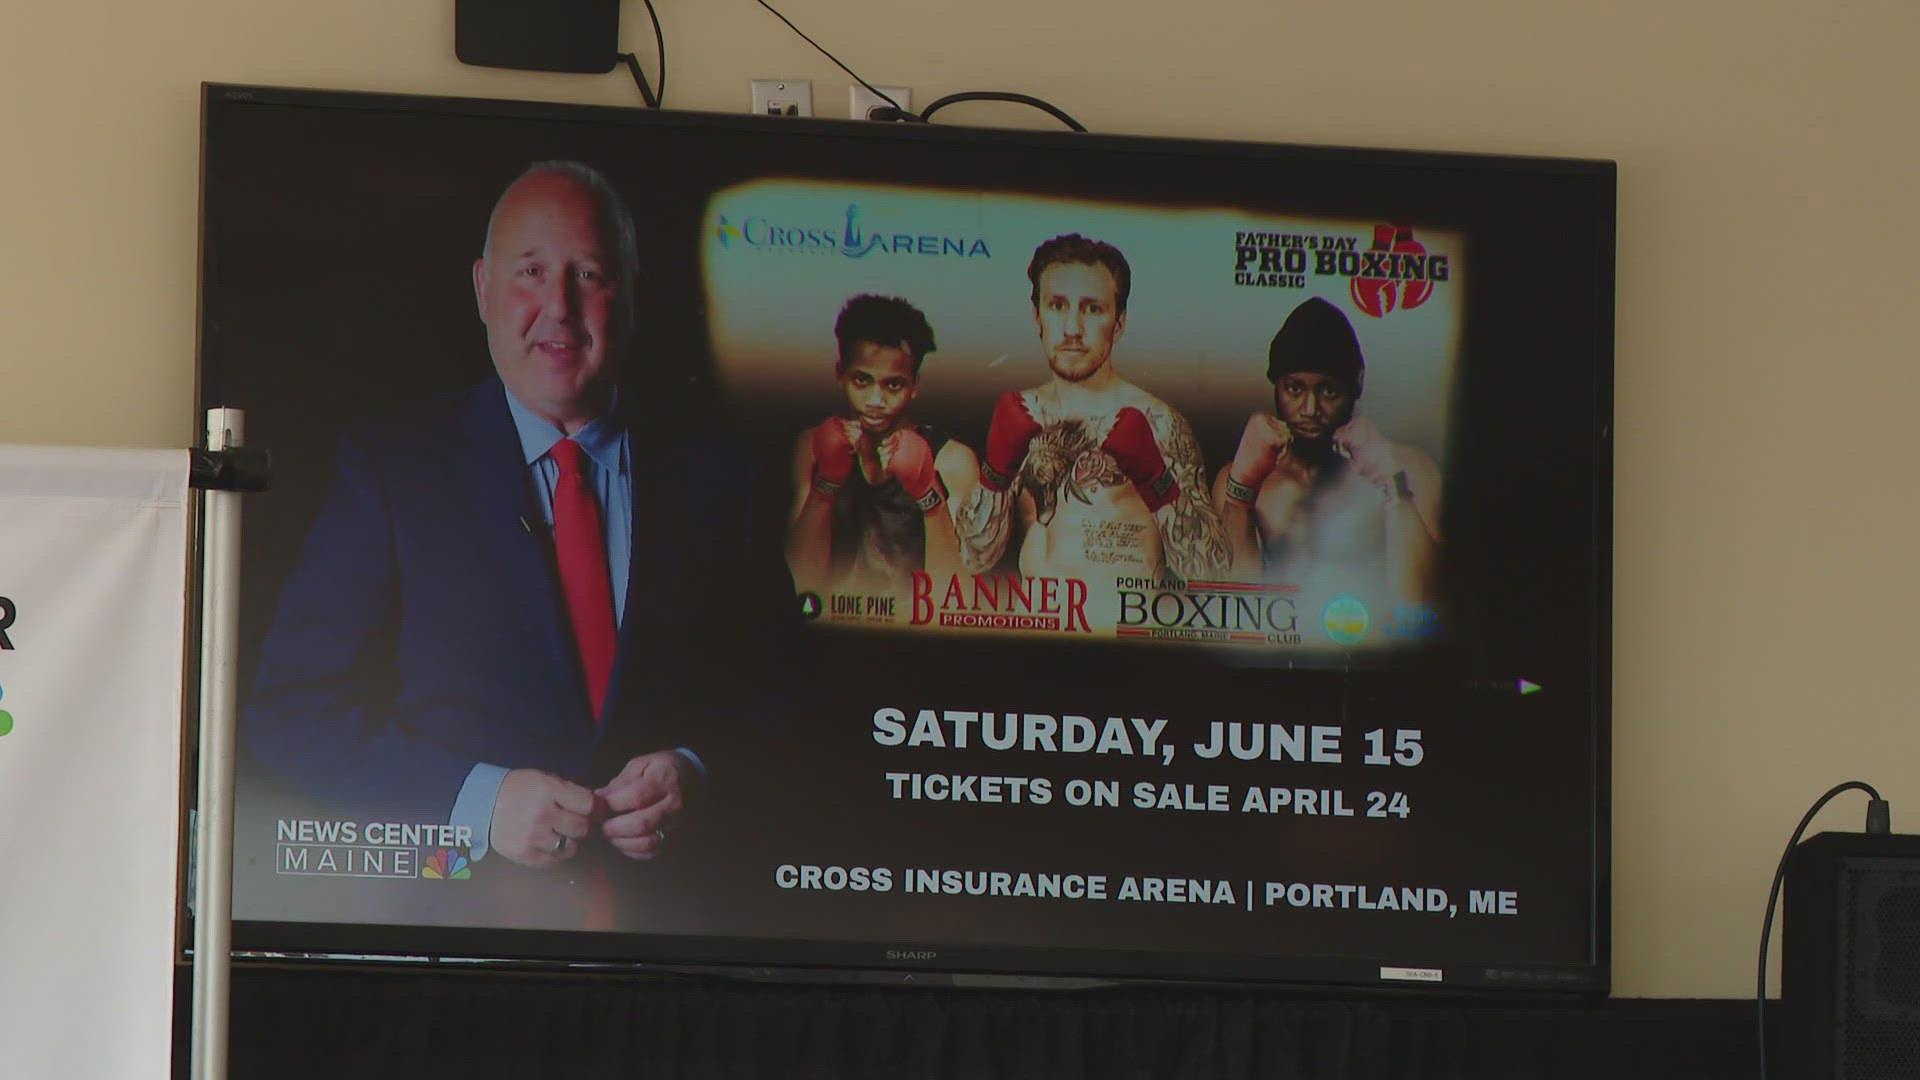 The Father's Day Pro Boxing Classic event on June 15 will feature an eight-bout card, including a world title fight as the main event.